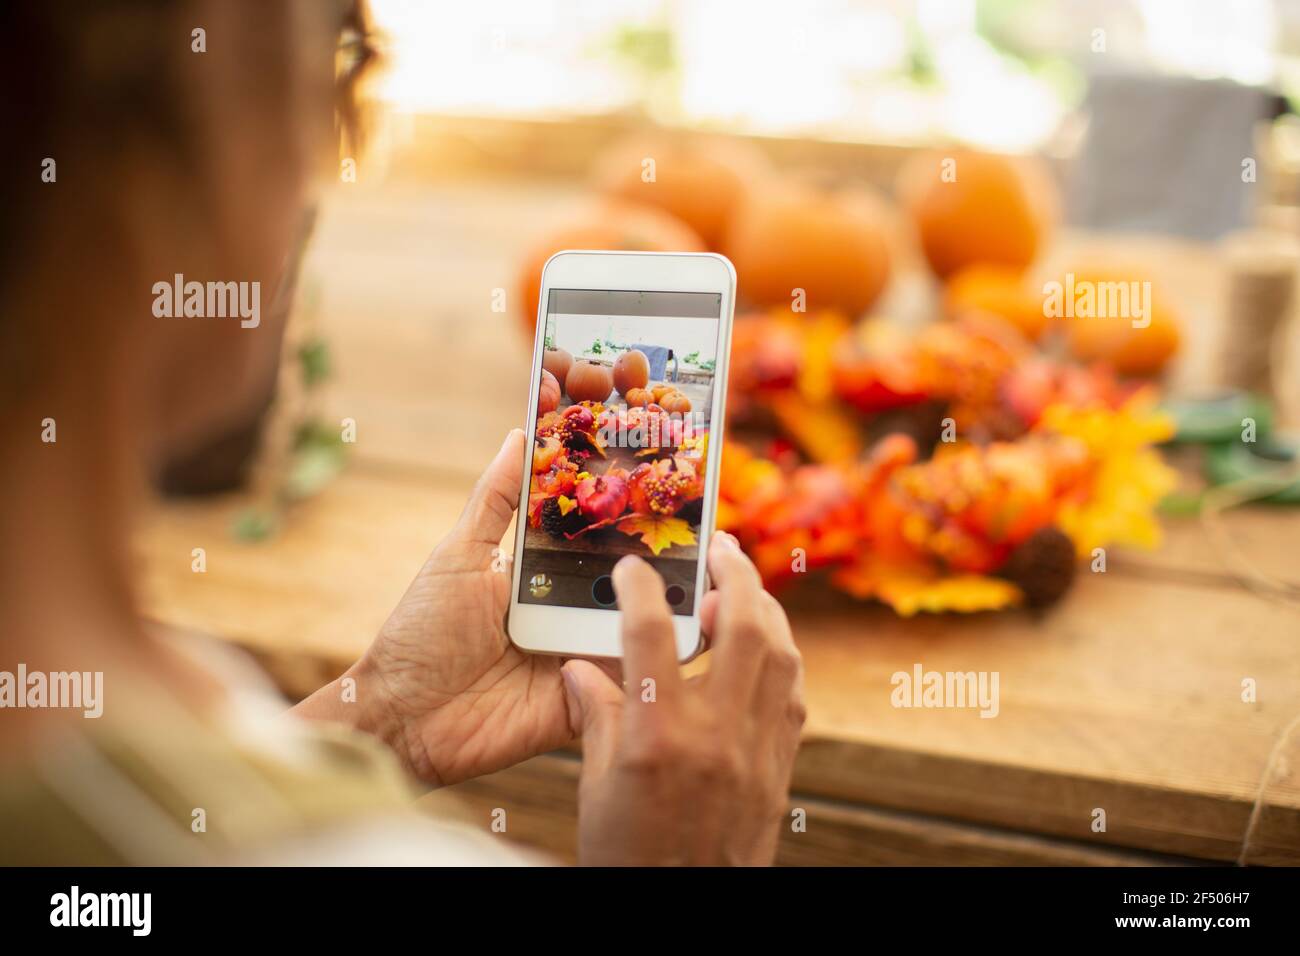 Female florist with camera phone photographing autumn display Stock Photo